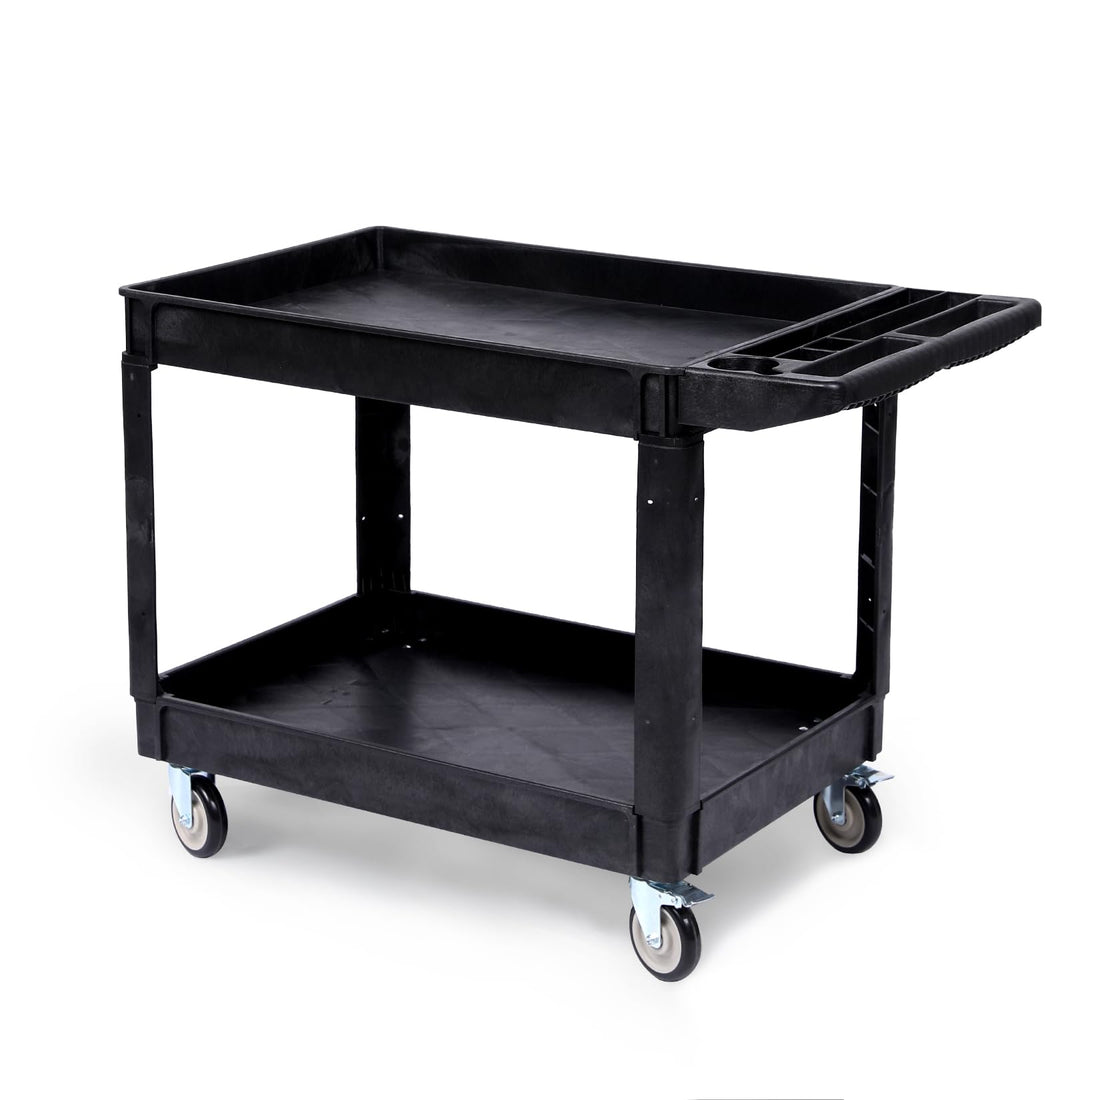 Utility Service Cart - Heavy Duty Plastic Toll Cart with Swivel Wheels and Brakes, 550LBS Capacity Detailing Cart with Large Shelf & Ergonomic Storage Handle for Warehouse Garage Cleaning